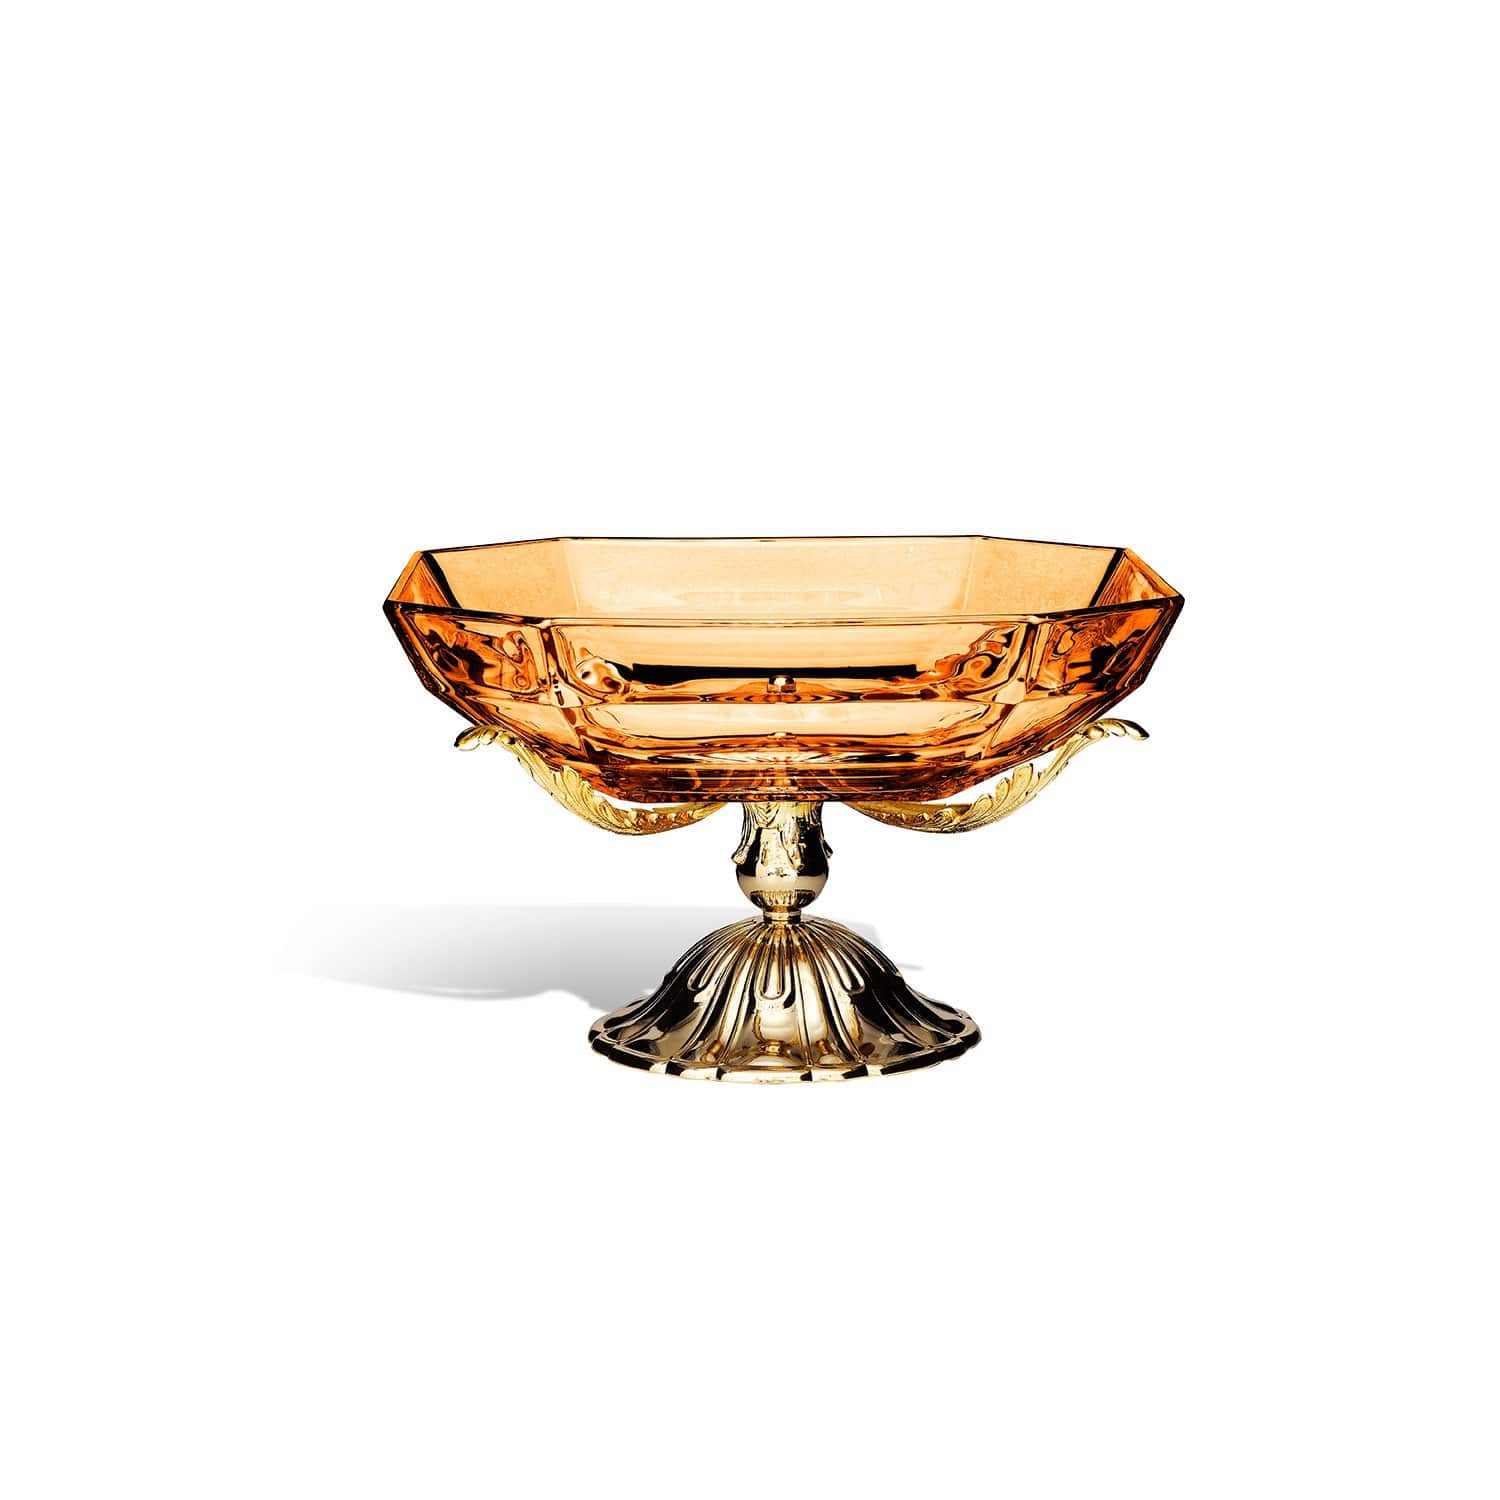 ROMA CENTERPIECE AMBER GLASS 35 X 35 X H20 CM - DC6153/OR-AM